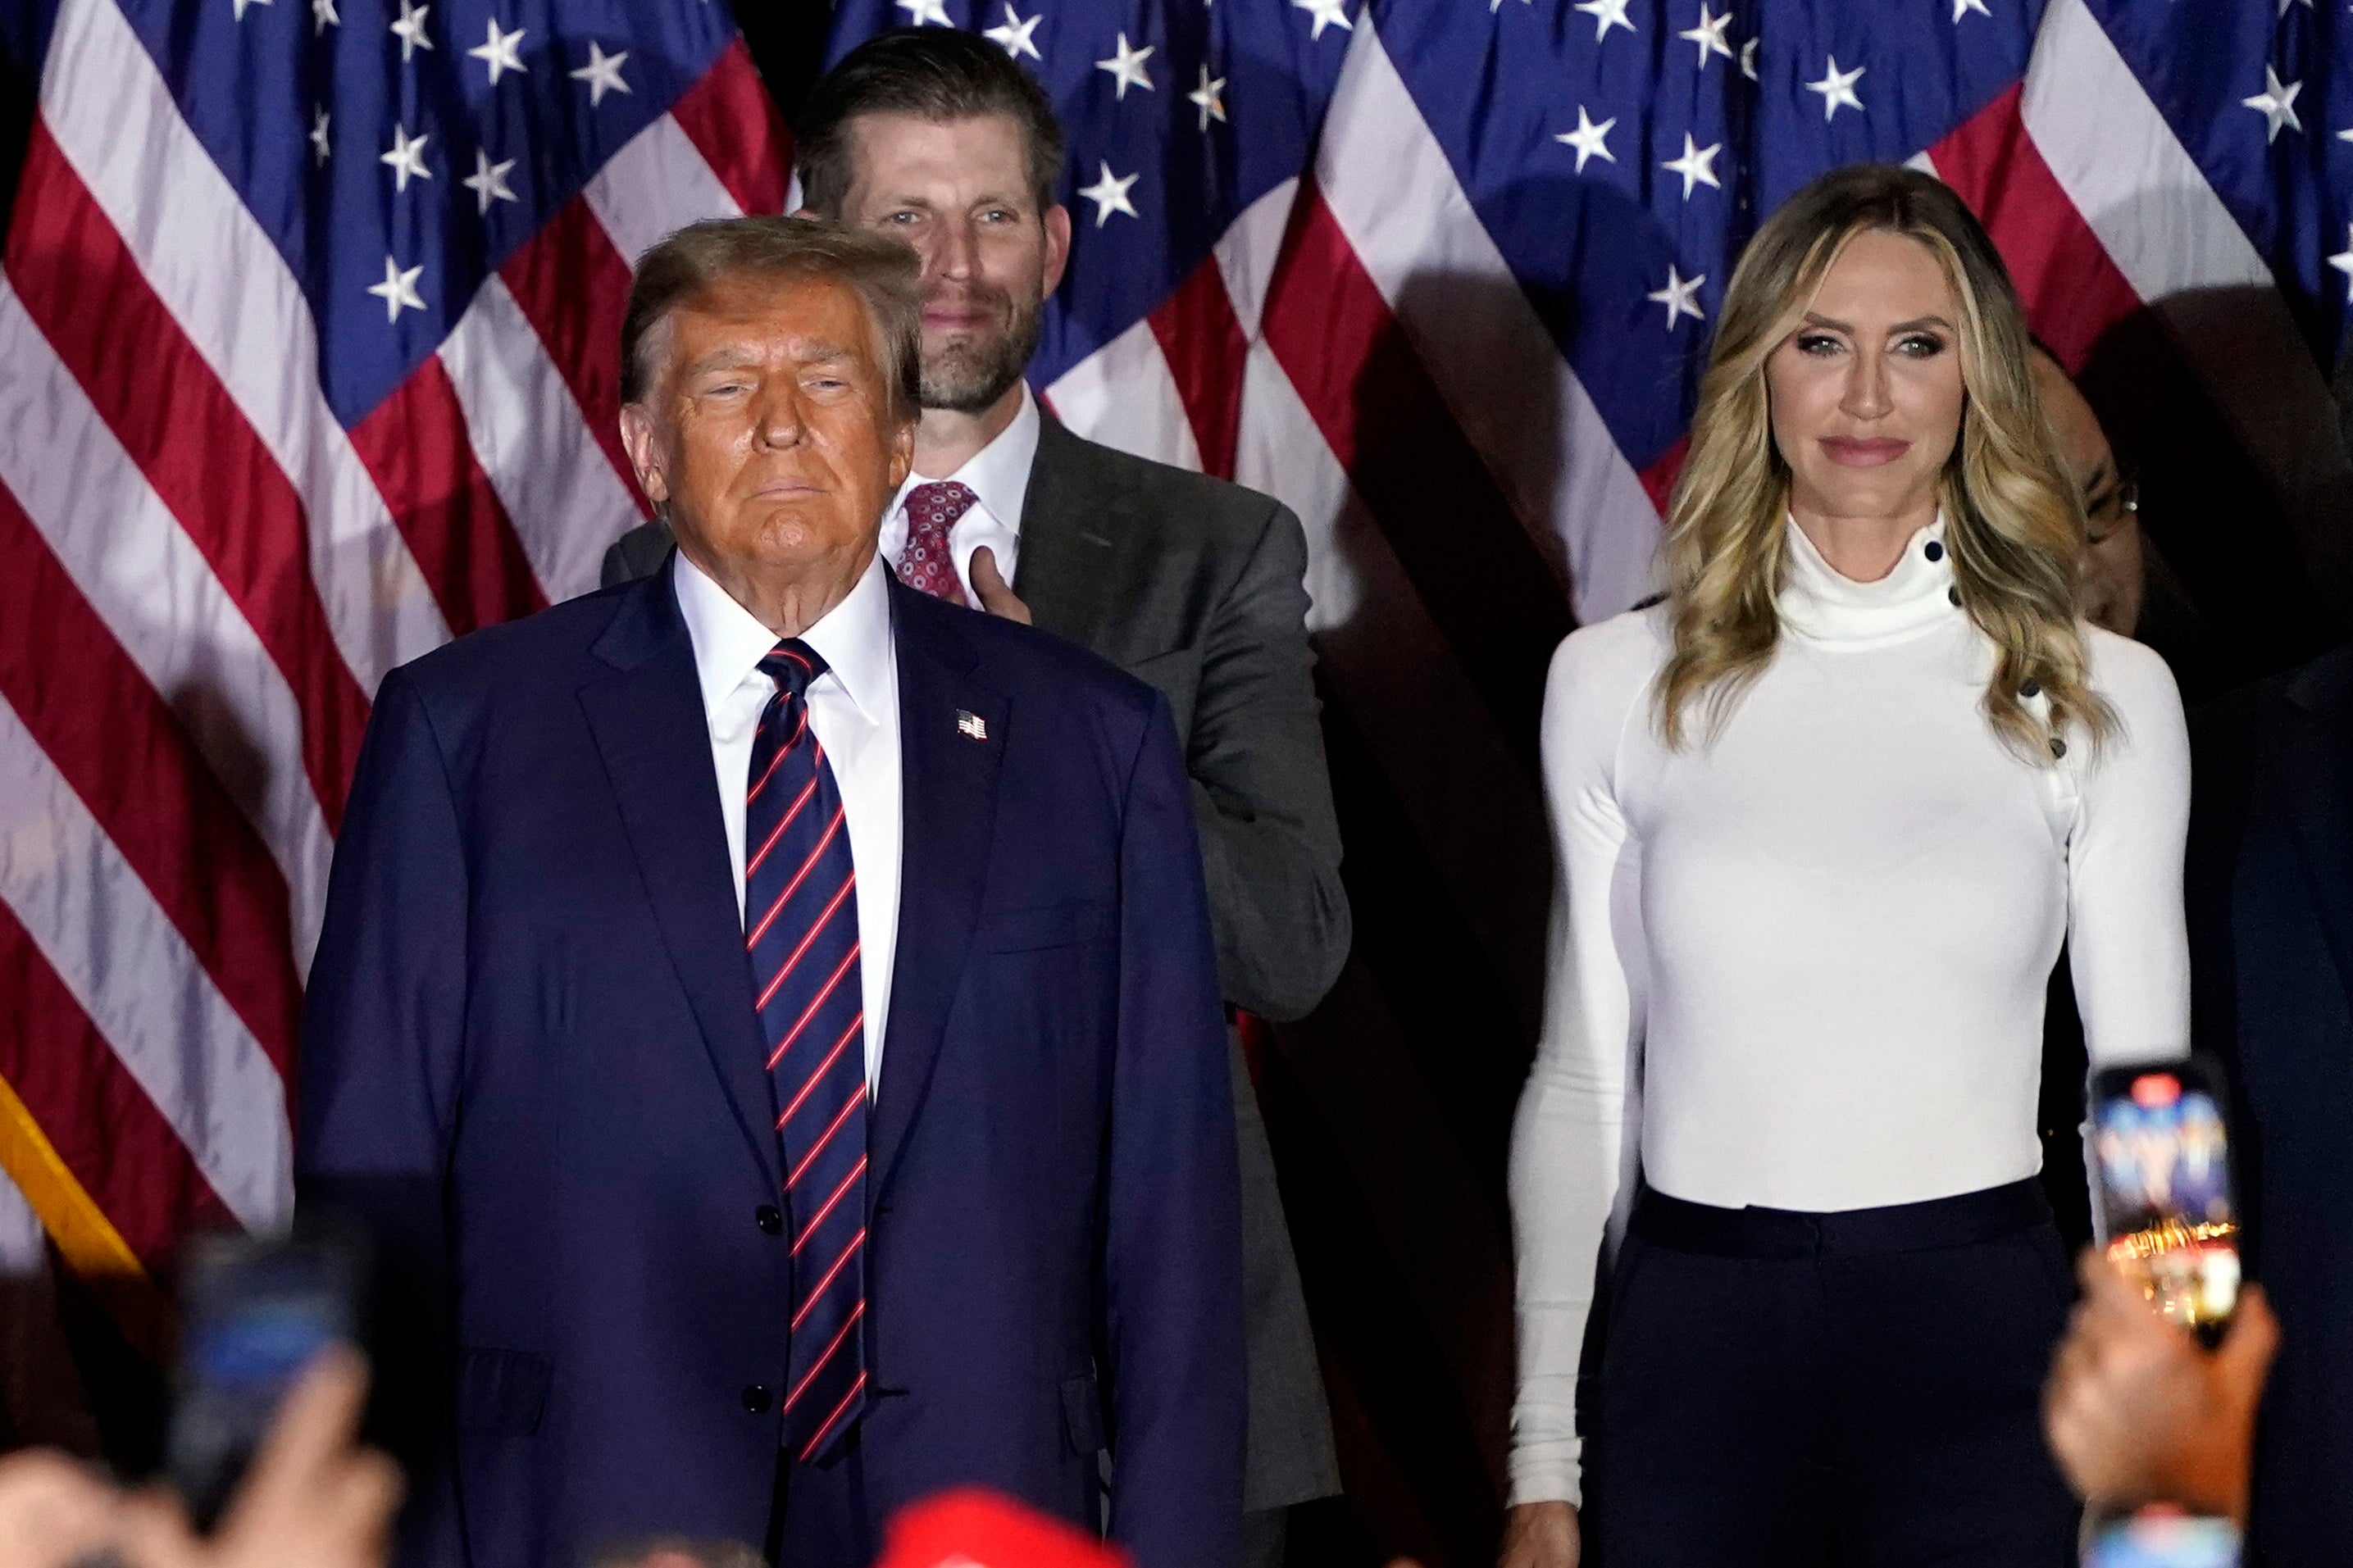 Republican presidential candidate former President Donald Trump arrives to speak at a primary election night party in Nashua, N.H., Tuesday, Jan. 23, 2024, with Eir and Lara Trump